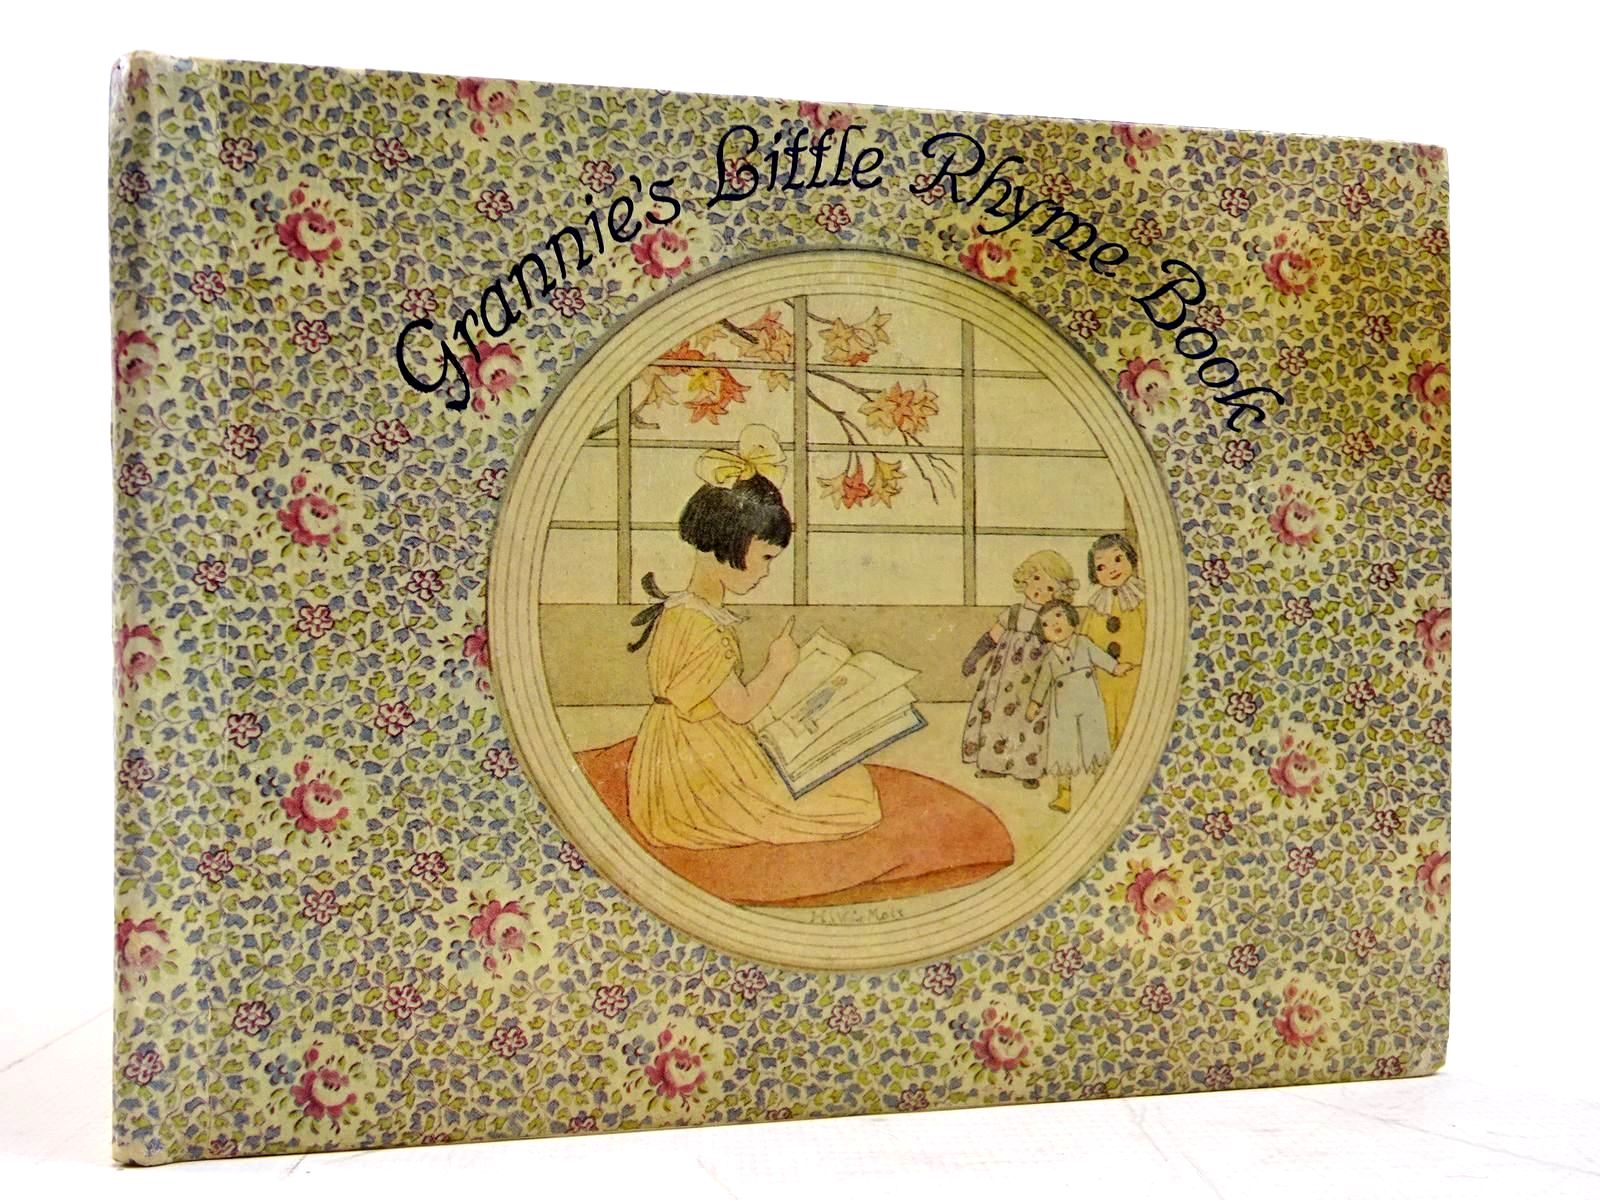 Photo of GRANNIE'S LITTLE RHYME BOOK illustrated by Willebeek Le Mair, Henriette published by Augener Ltd., David McKay (STOCK CODE: 2131552)  for sale by Stella & Rose's Books